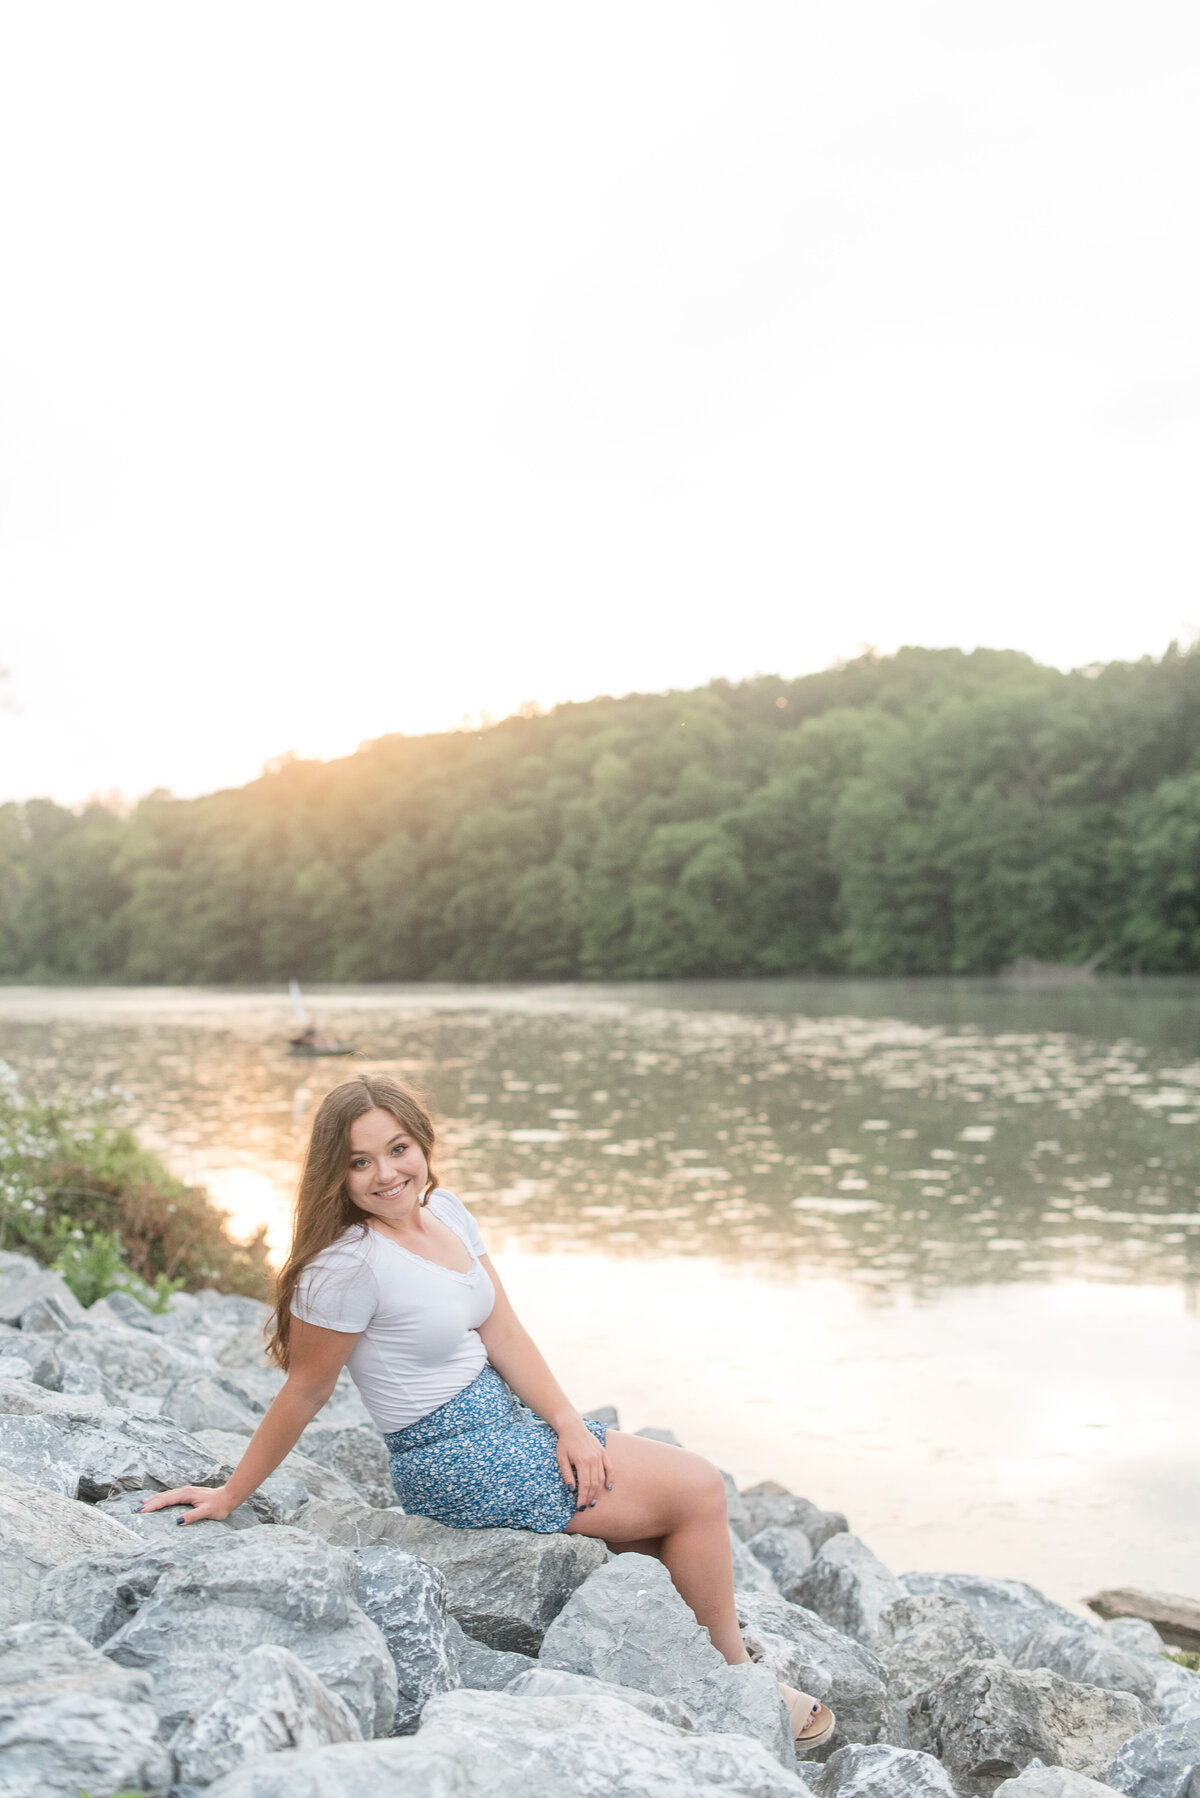 Senior girl sitting on large gray rocks leaning back on right hand at Speedwell Forge Lake in Lititz, Pennsylvania.